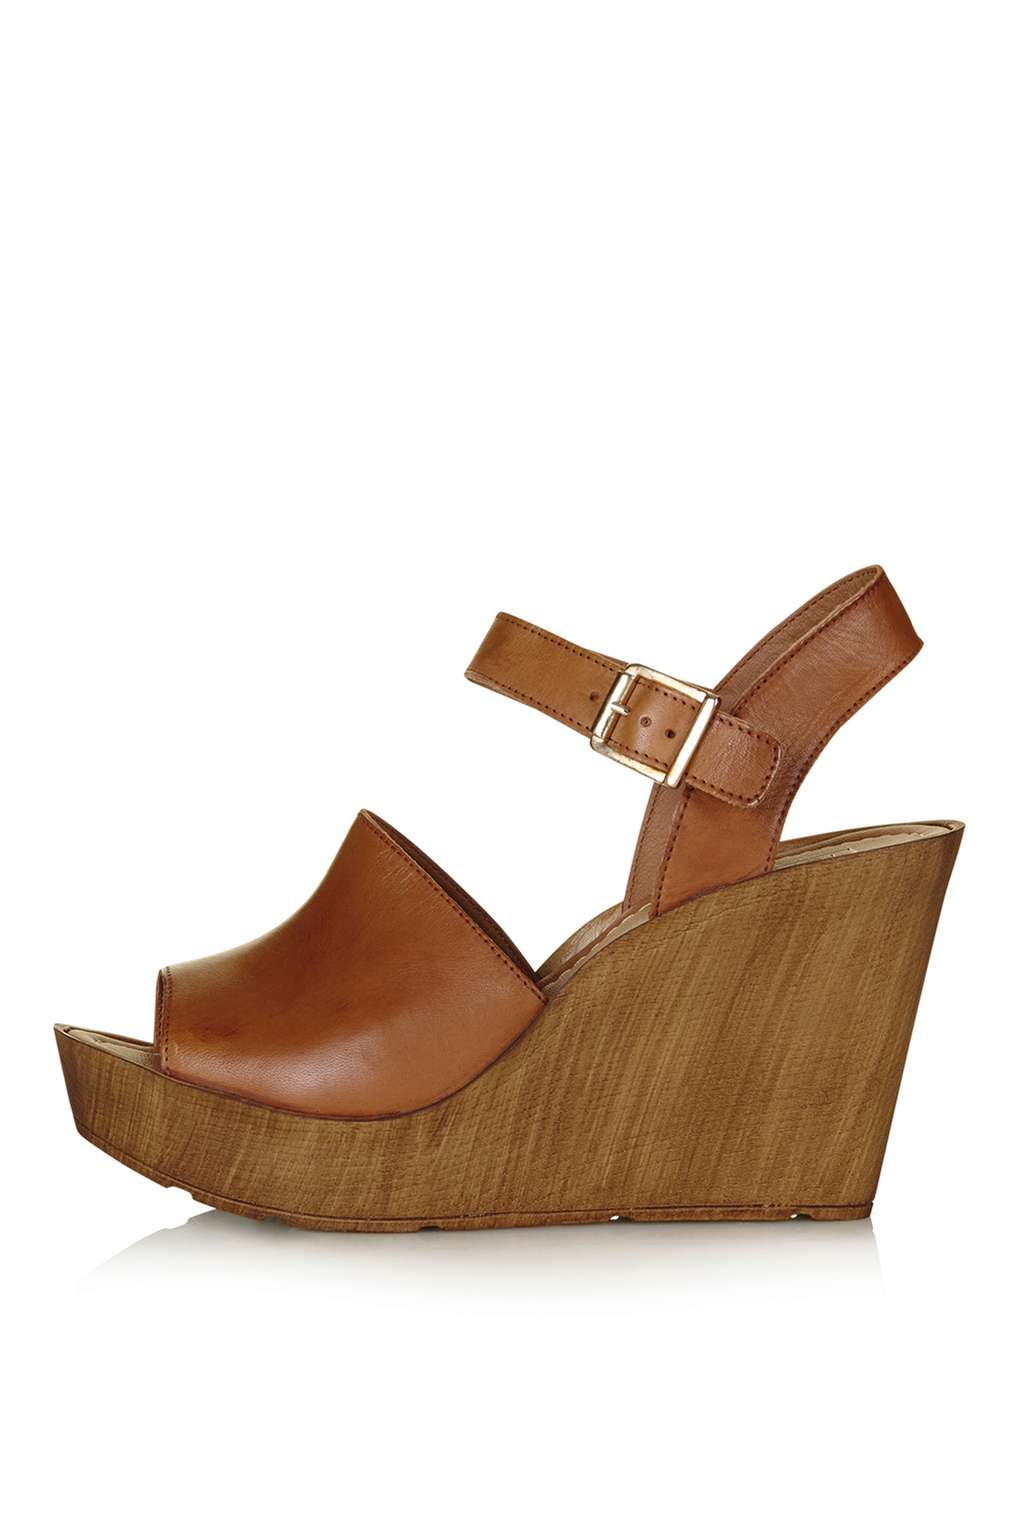 TOPSHOP Leather Willow Two-part Wedge 